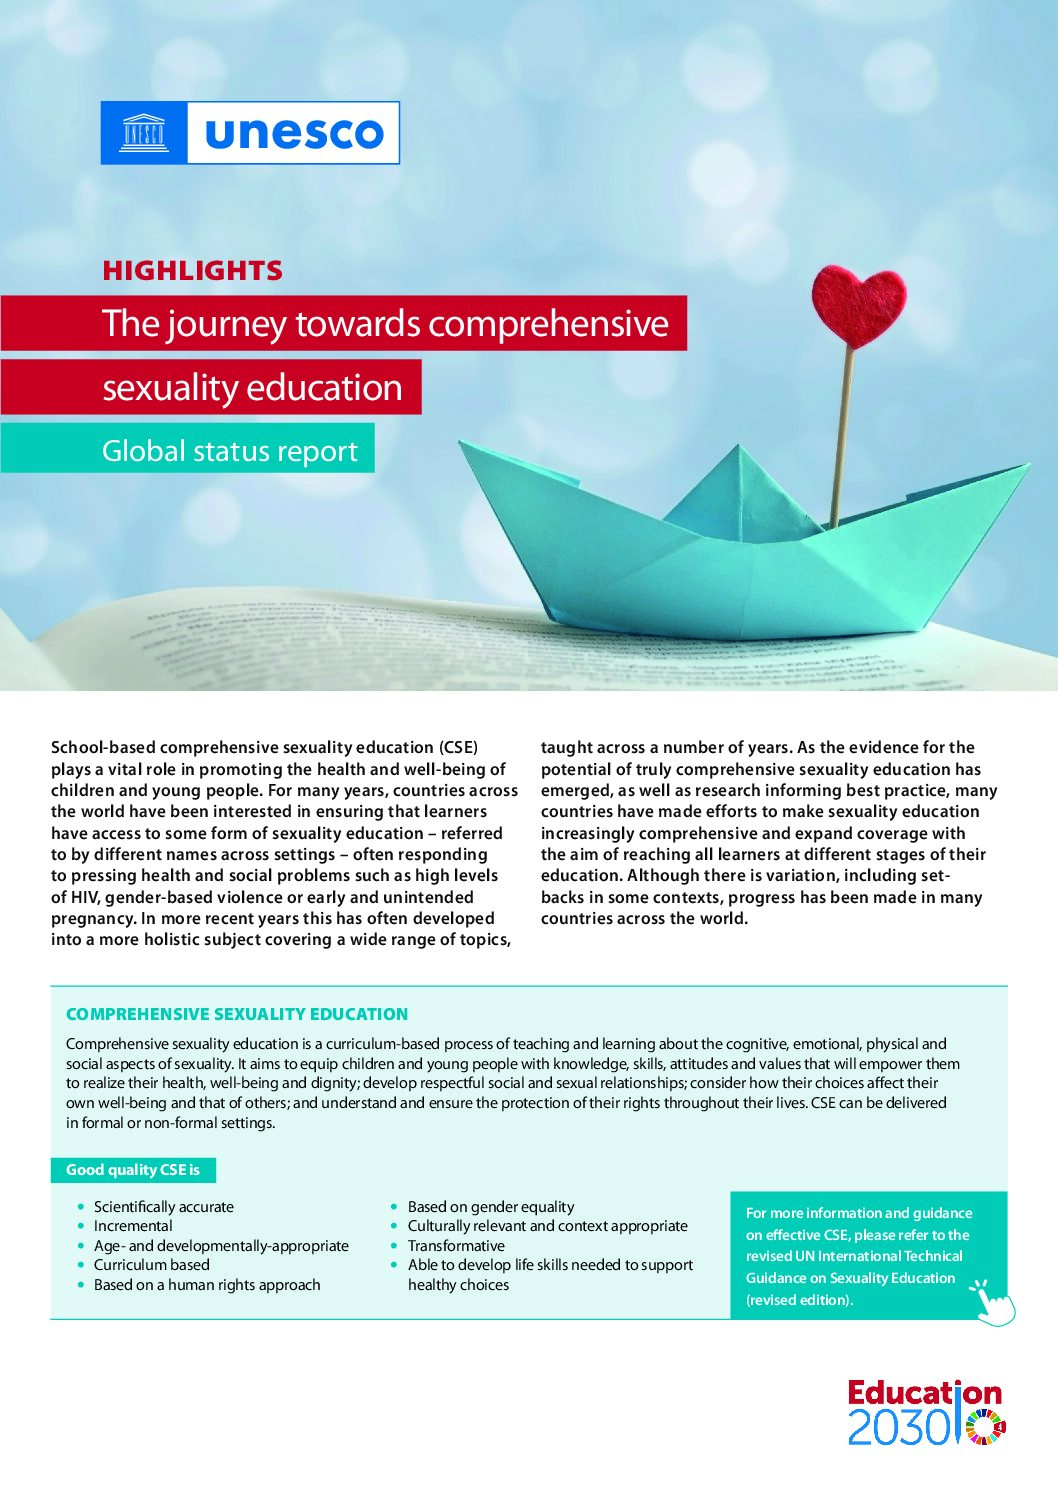 The journey towards comprehensive sexuality education: global status report